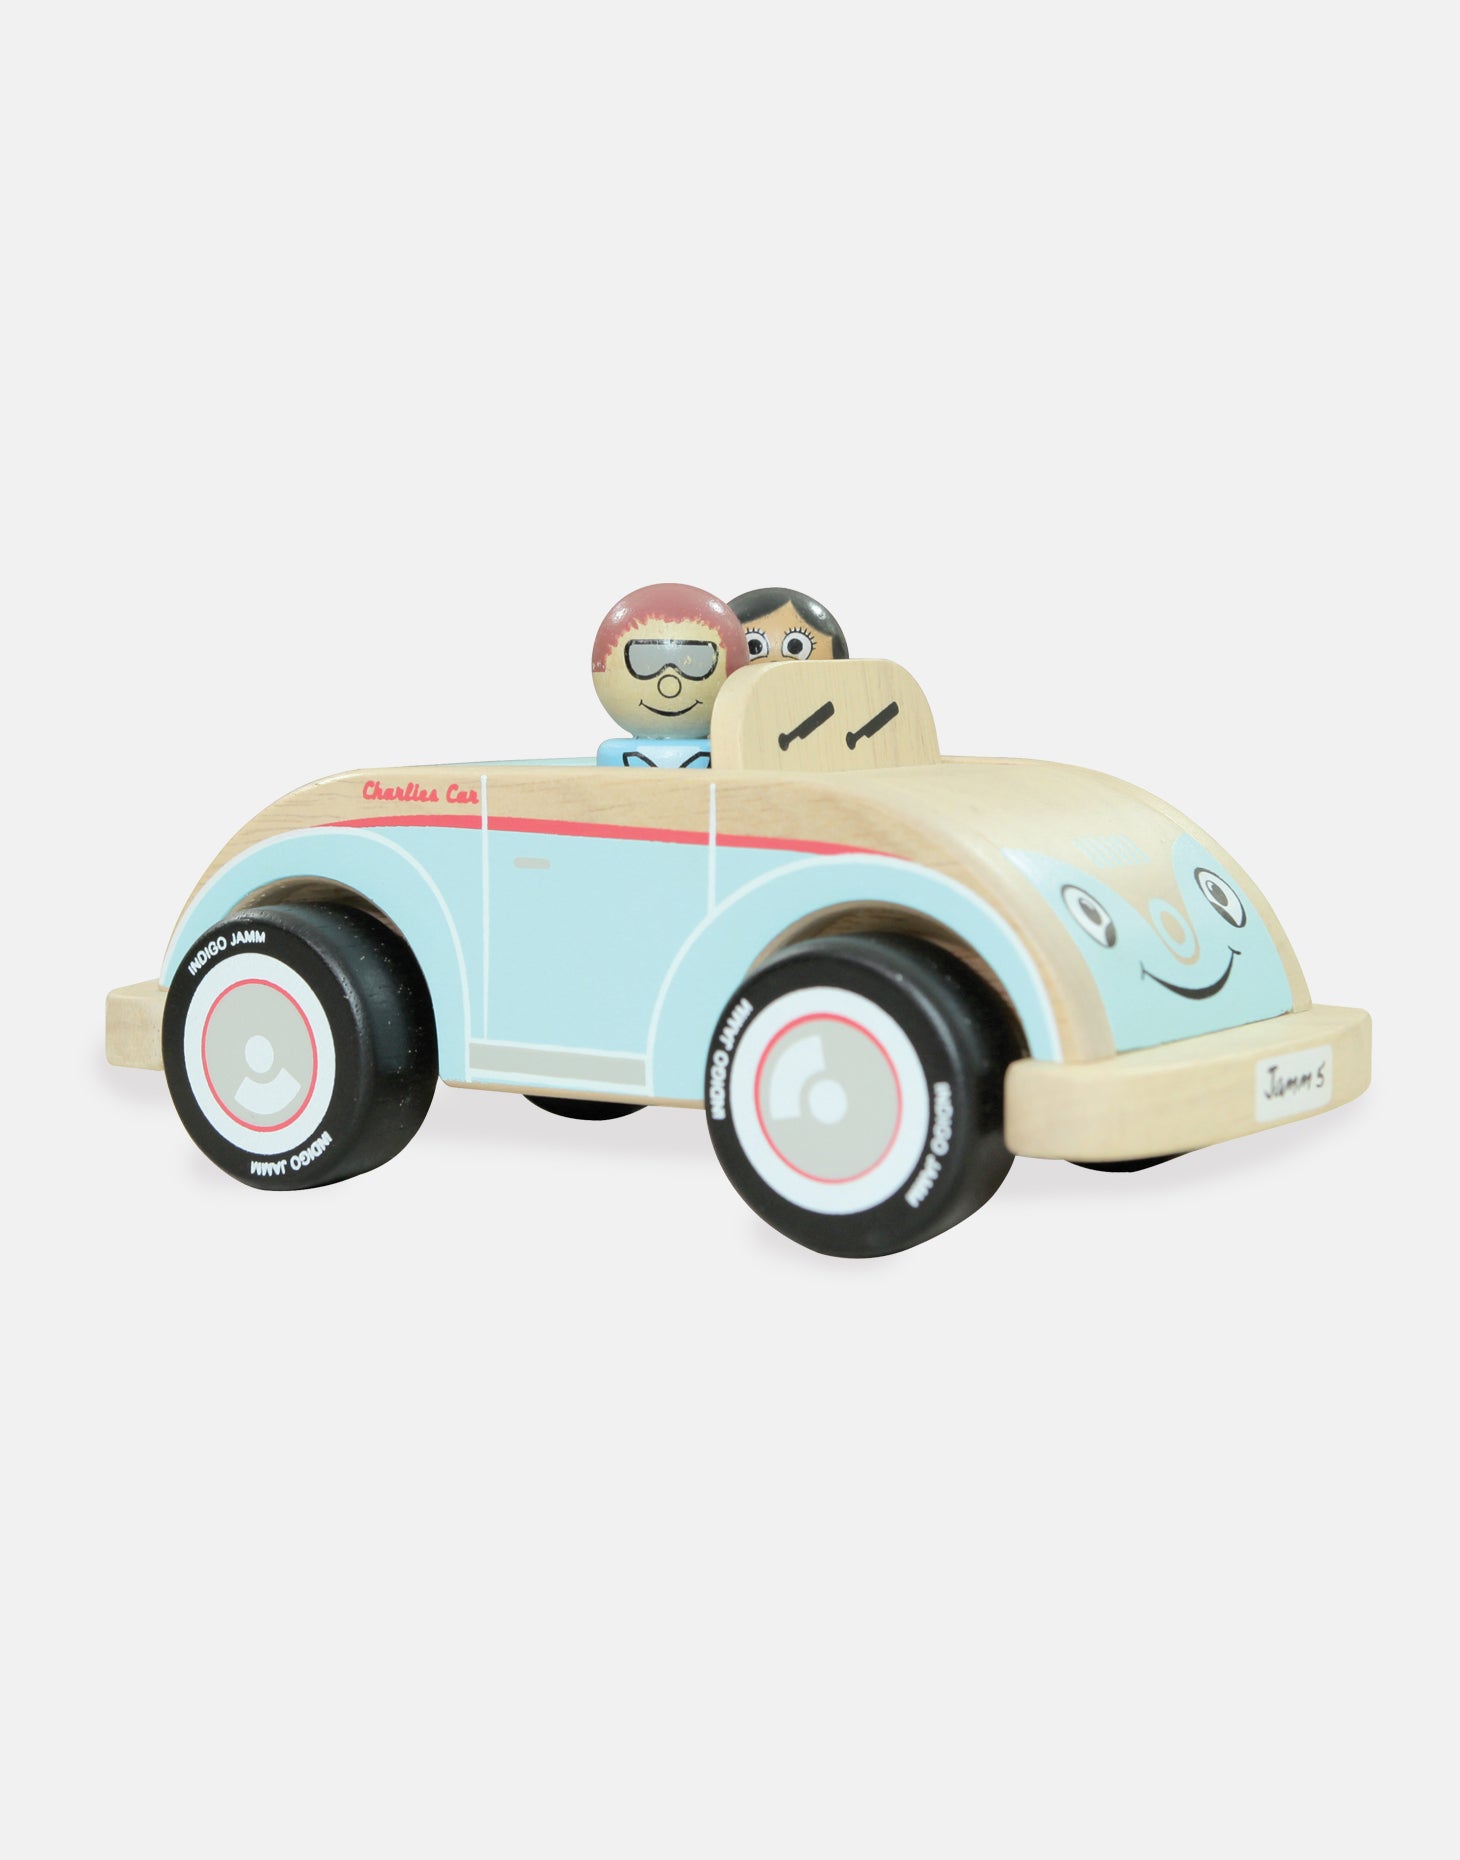 pale blue quality wooden vehicle by indigo jamm